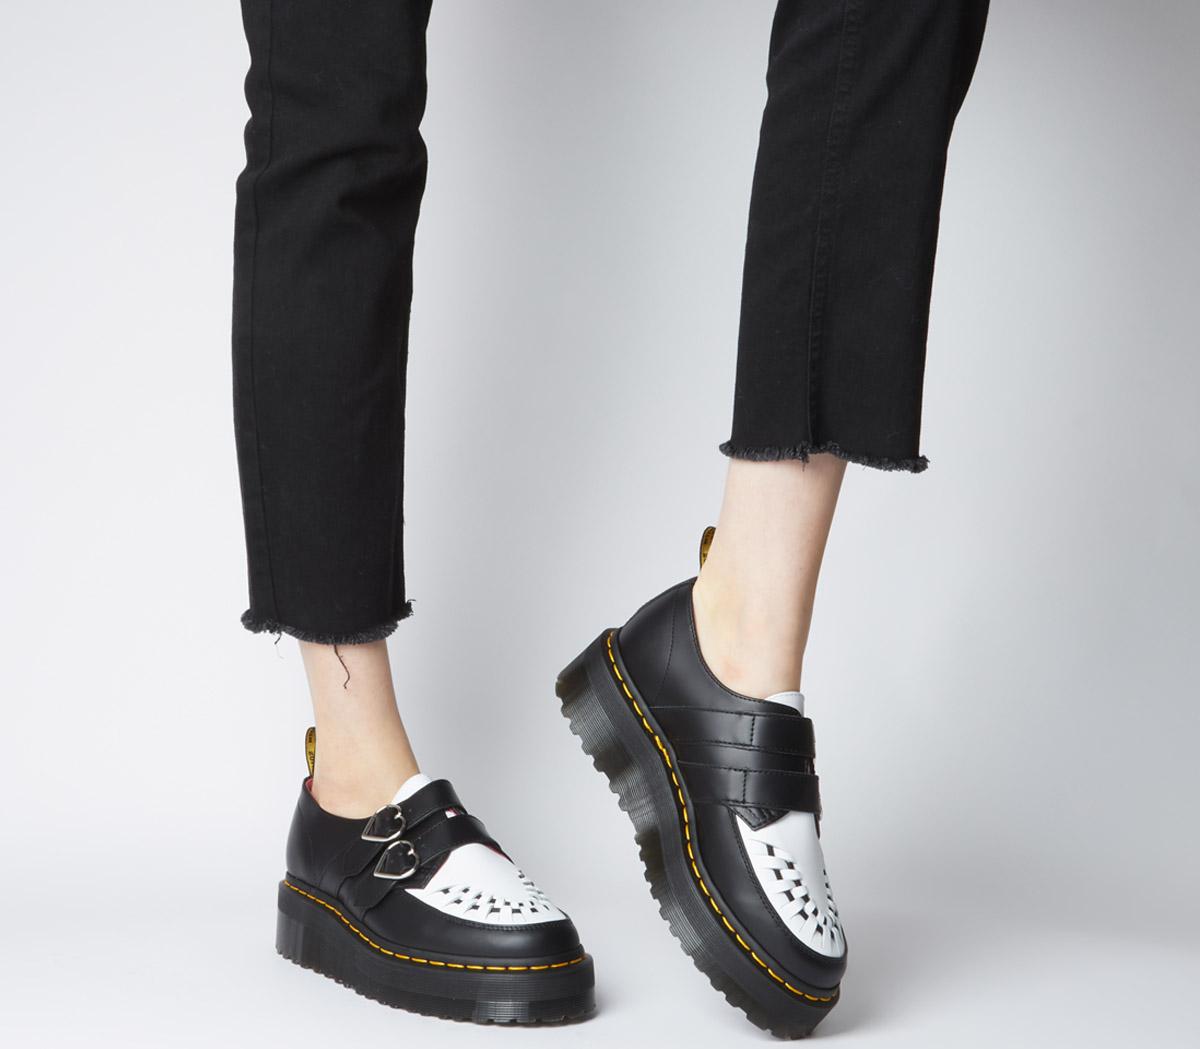 doc martens black and white shoes